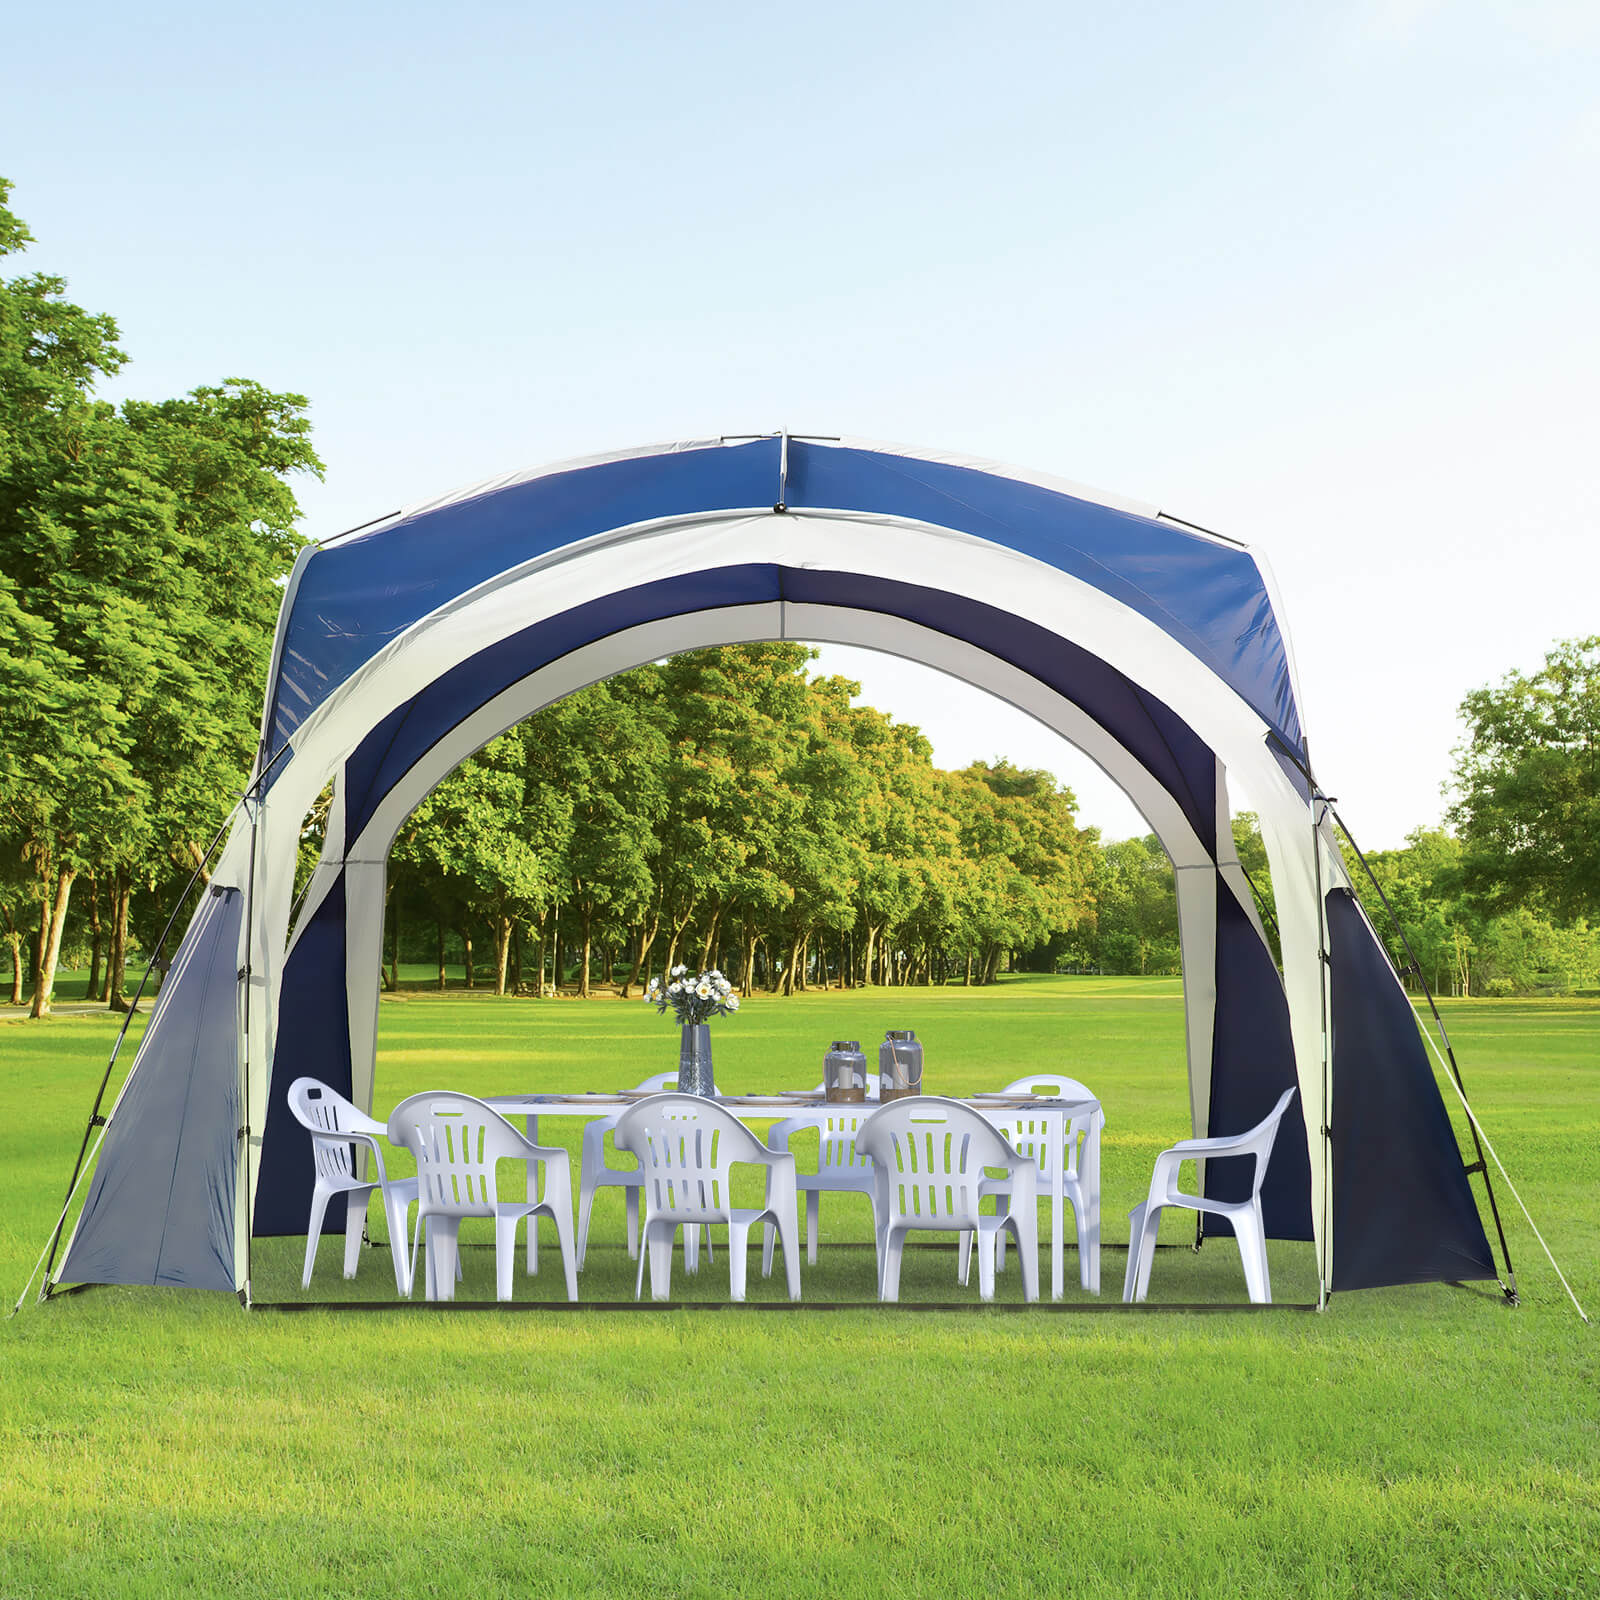 3.5 x 3.5M Outdoor Gazebo Event Dome Shelter Party Tent for Garden Camping